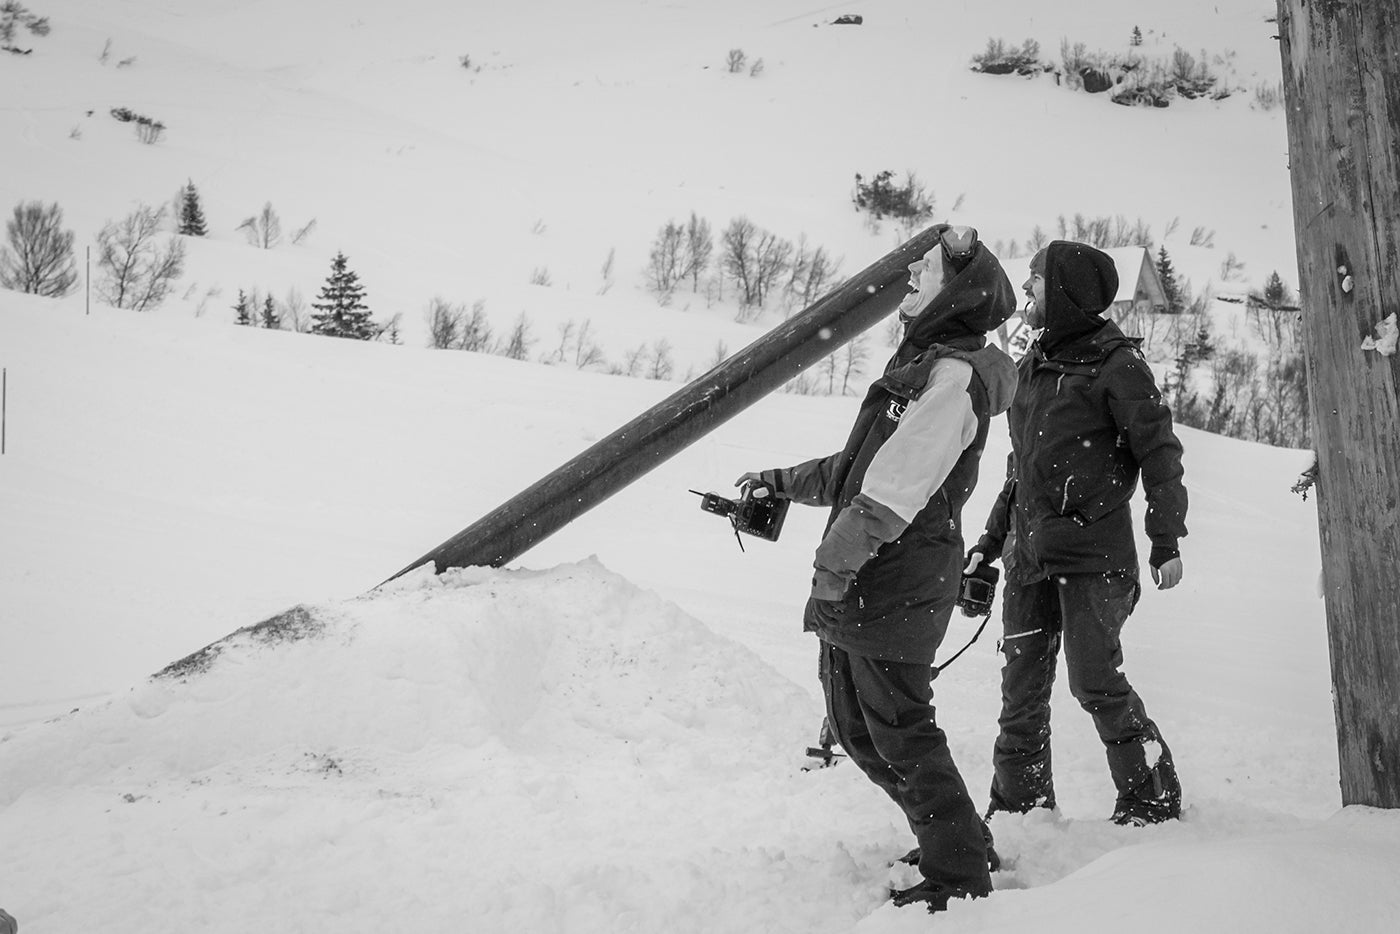 ski and snowboard photographers laughing